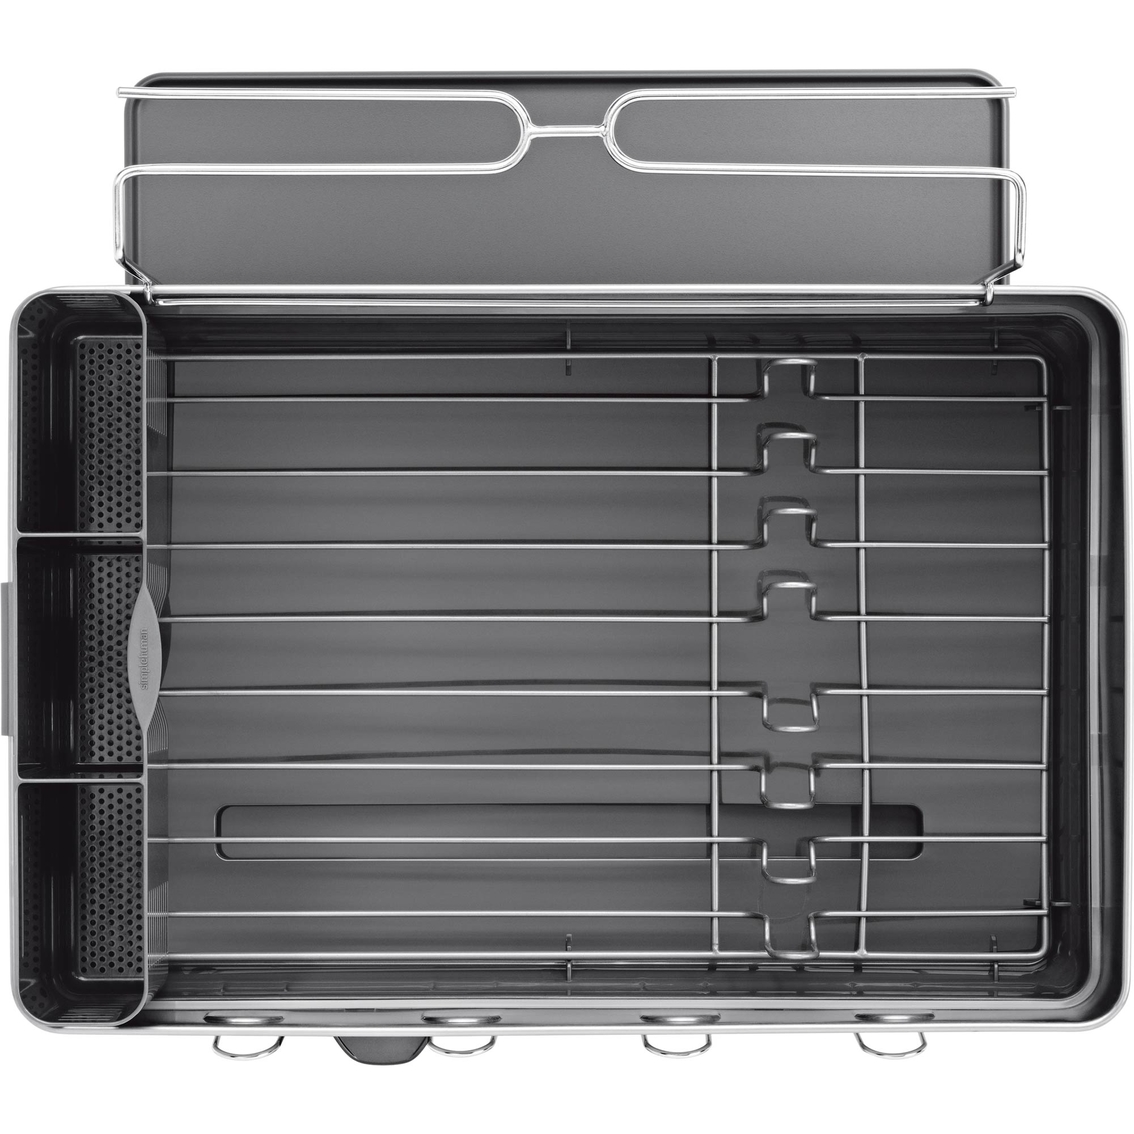  simplehuman Steel Frame Kitchen Dish Drying Rack With